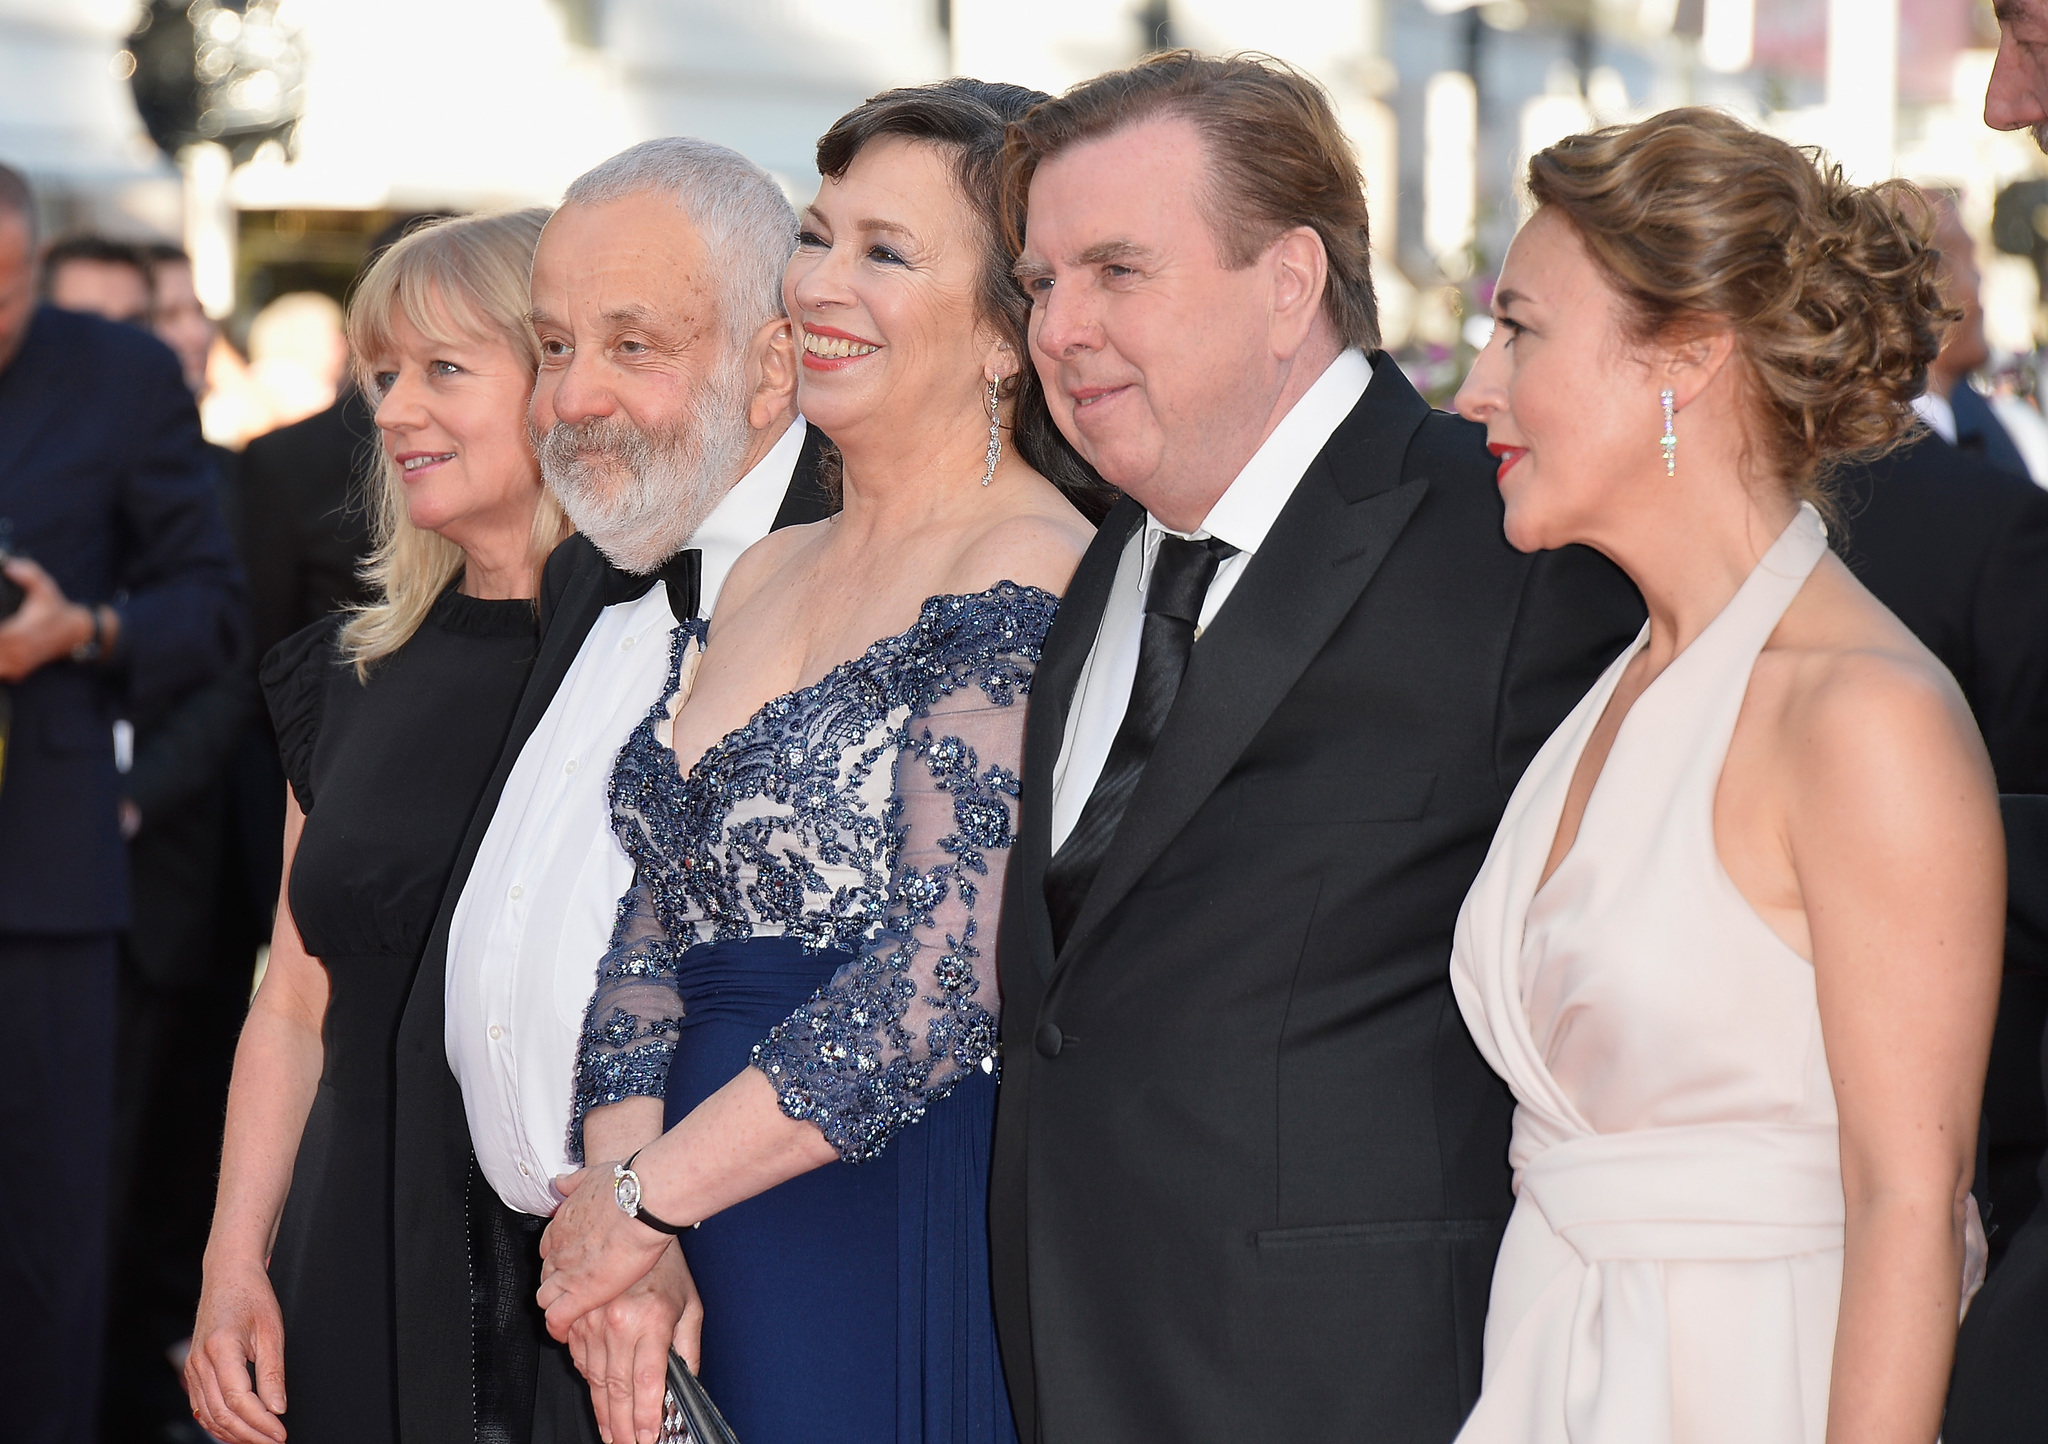 Timothy Spall, Mike Leigh, Dorothy Atkinson, Marion Bailey and Georgina Lowe at event of Mr. Turner (2014)